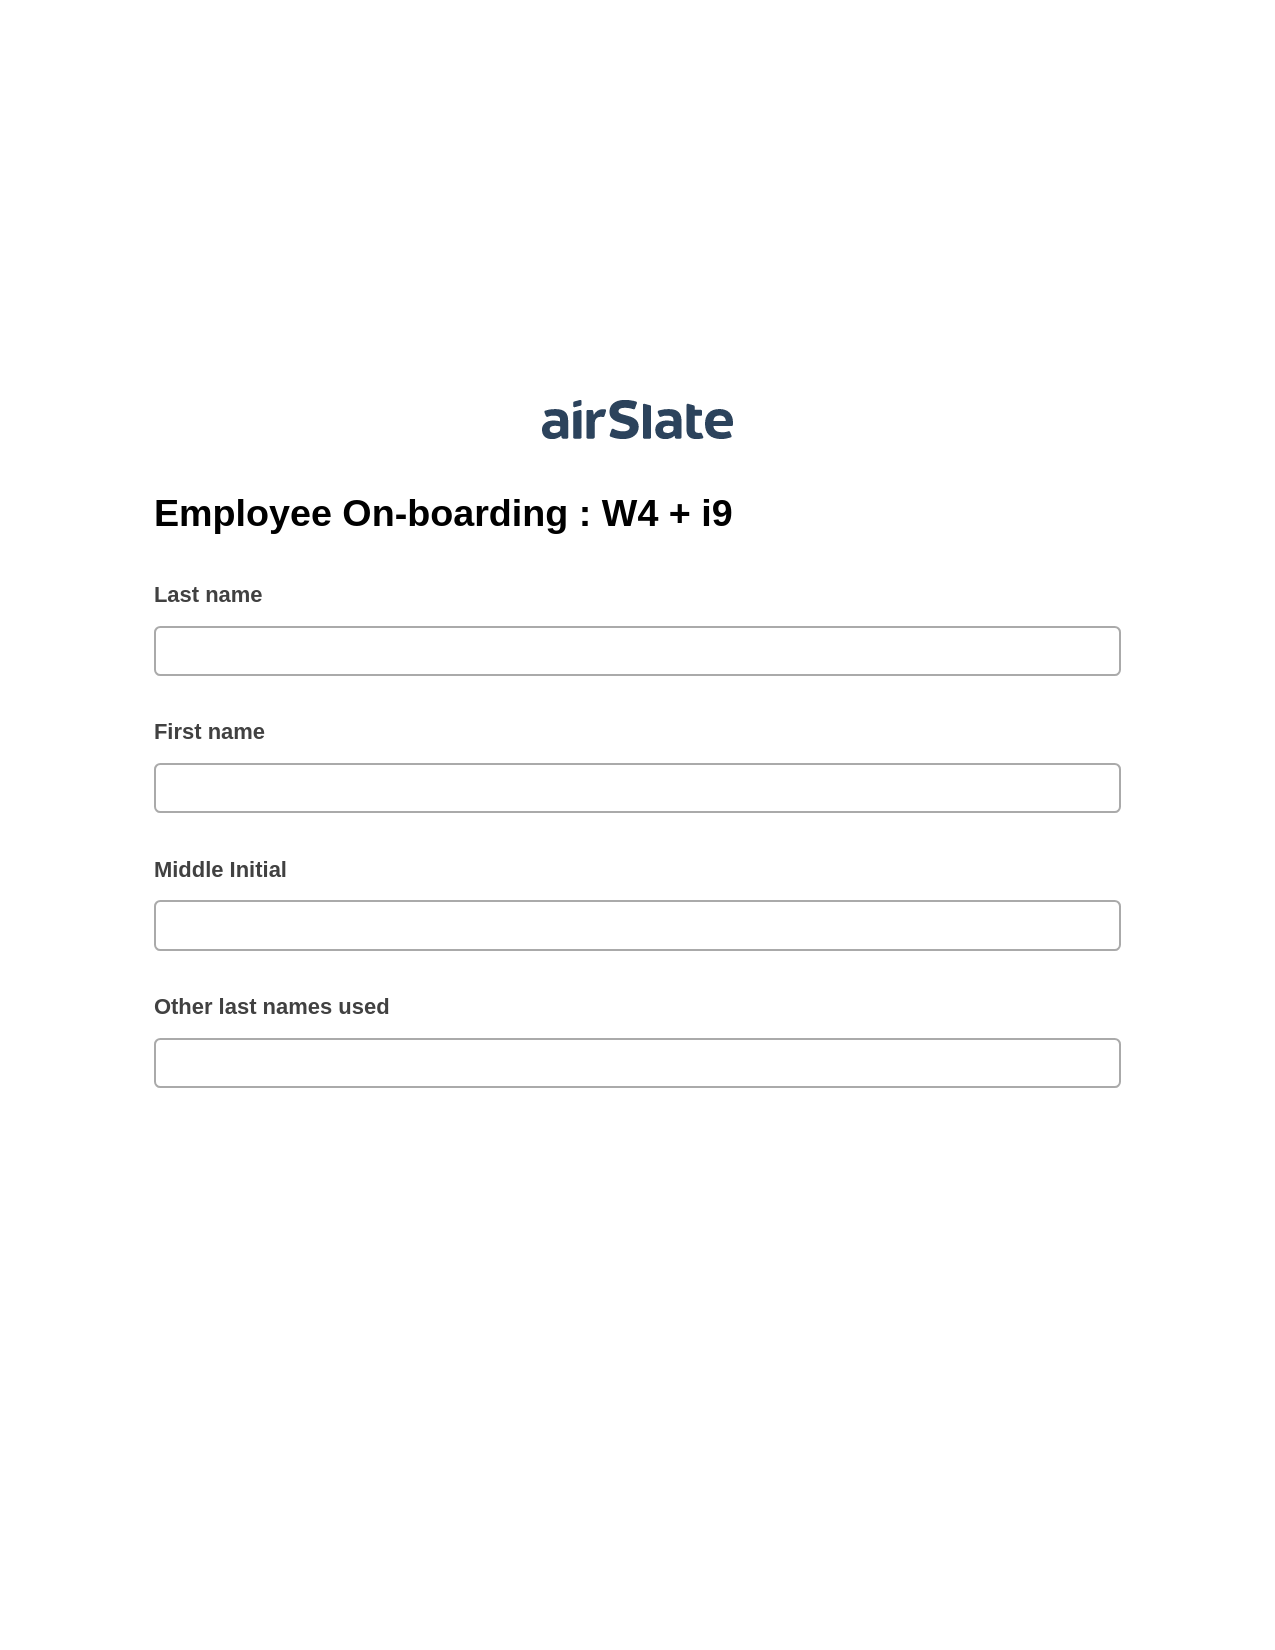 Employee On-boarding : W4 + i9 Pre-fill from Google Sheets Bot, Set Signature Type Bot, Post-finish Document Bot